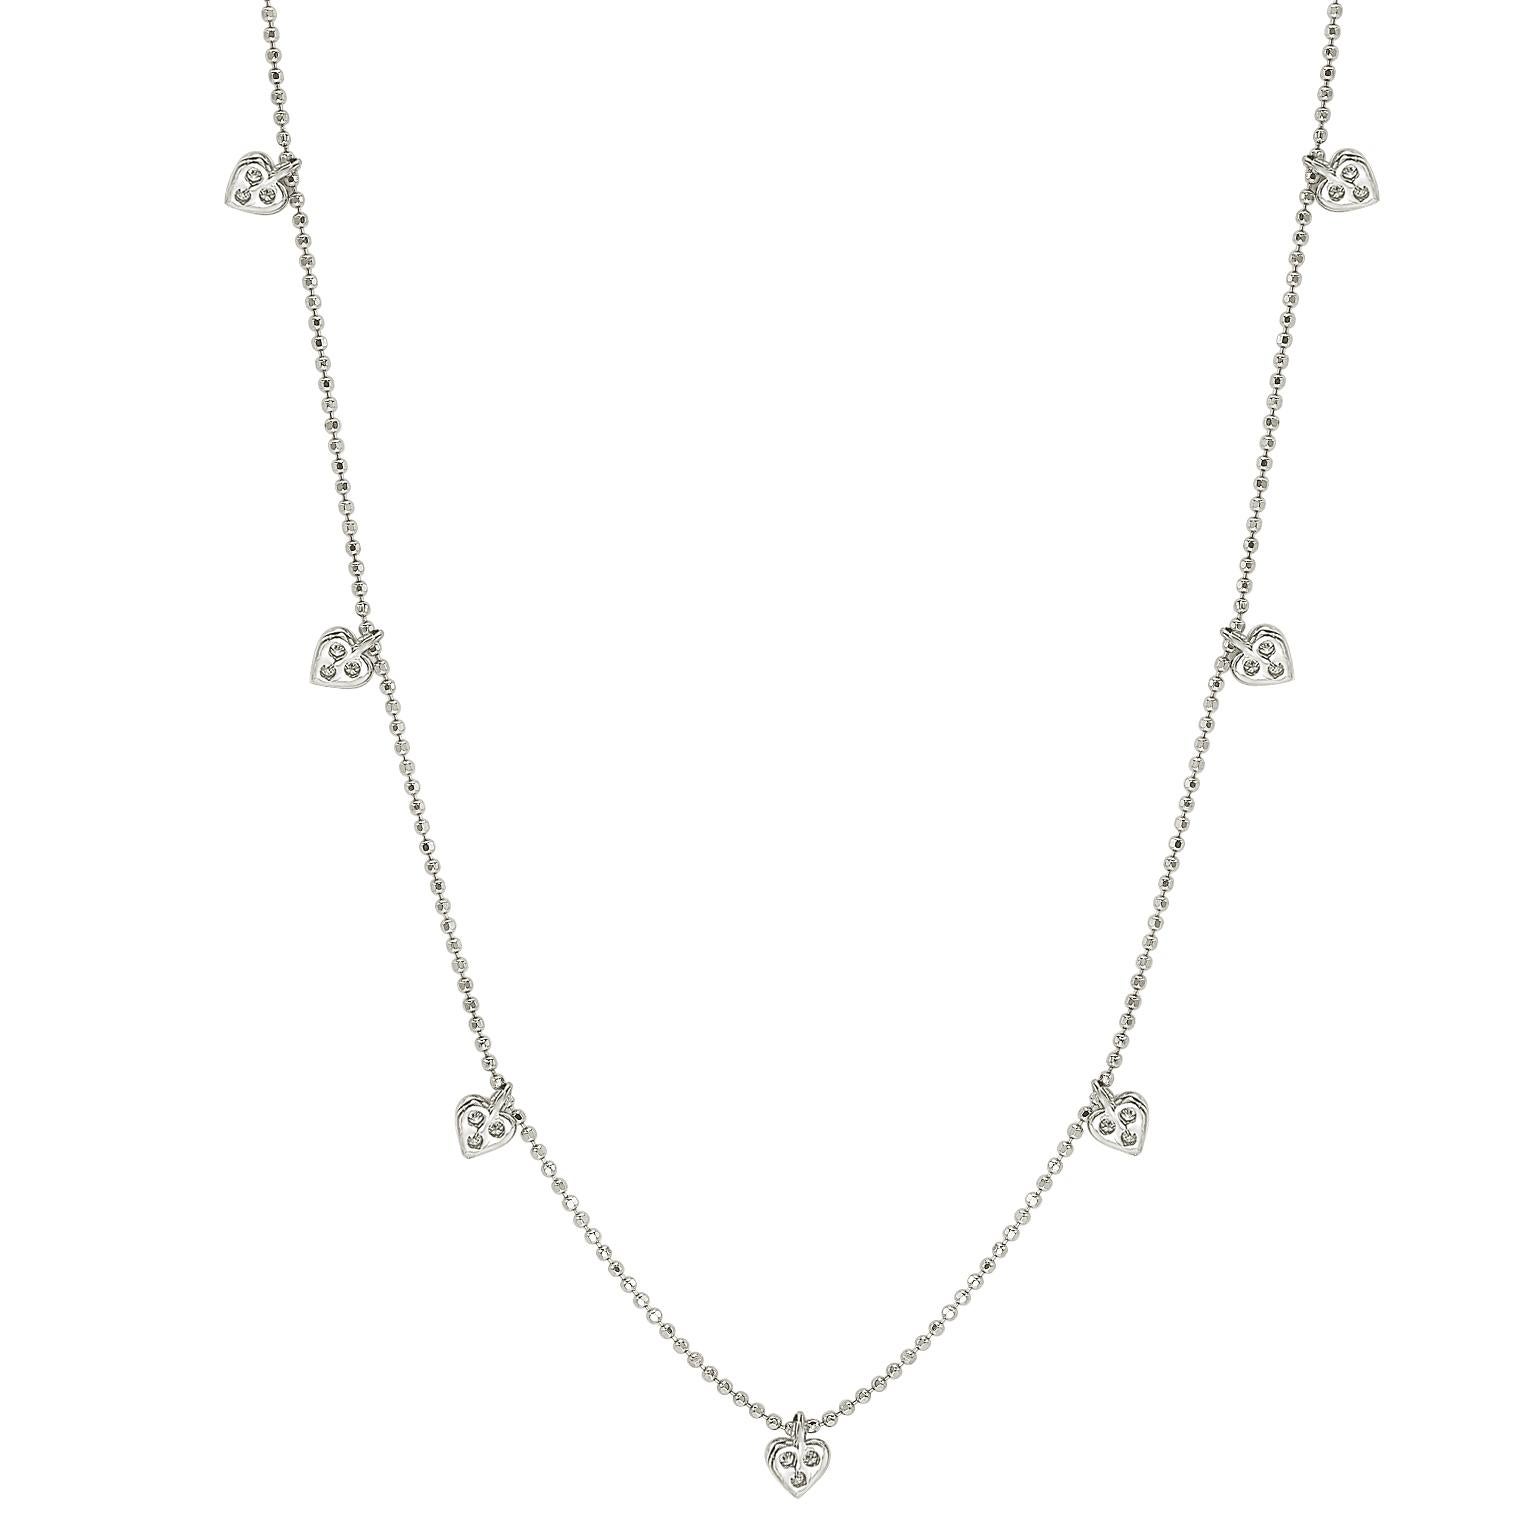 This unique Suzy Levian diamond station heart necklace displays round-cut diamonds on 14 karat white gold setting. This gorgeous necklace contains 21 white round cut diamonds totaling .26cttw. The necklace has 7 hearts, each heart contains 3 diamond